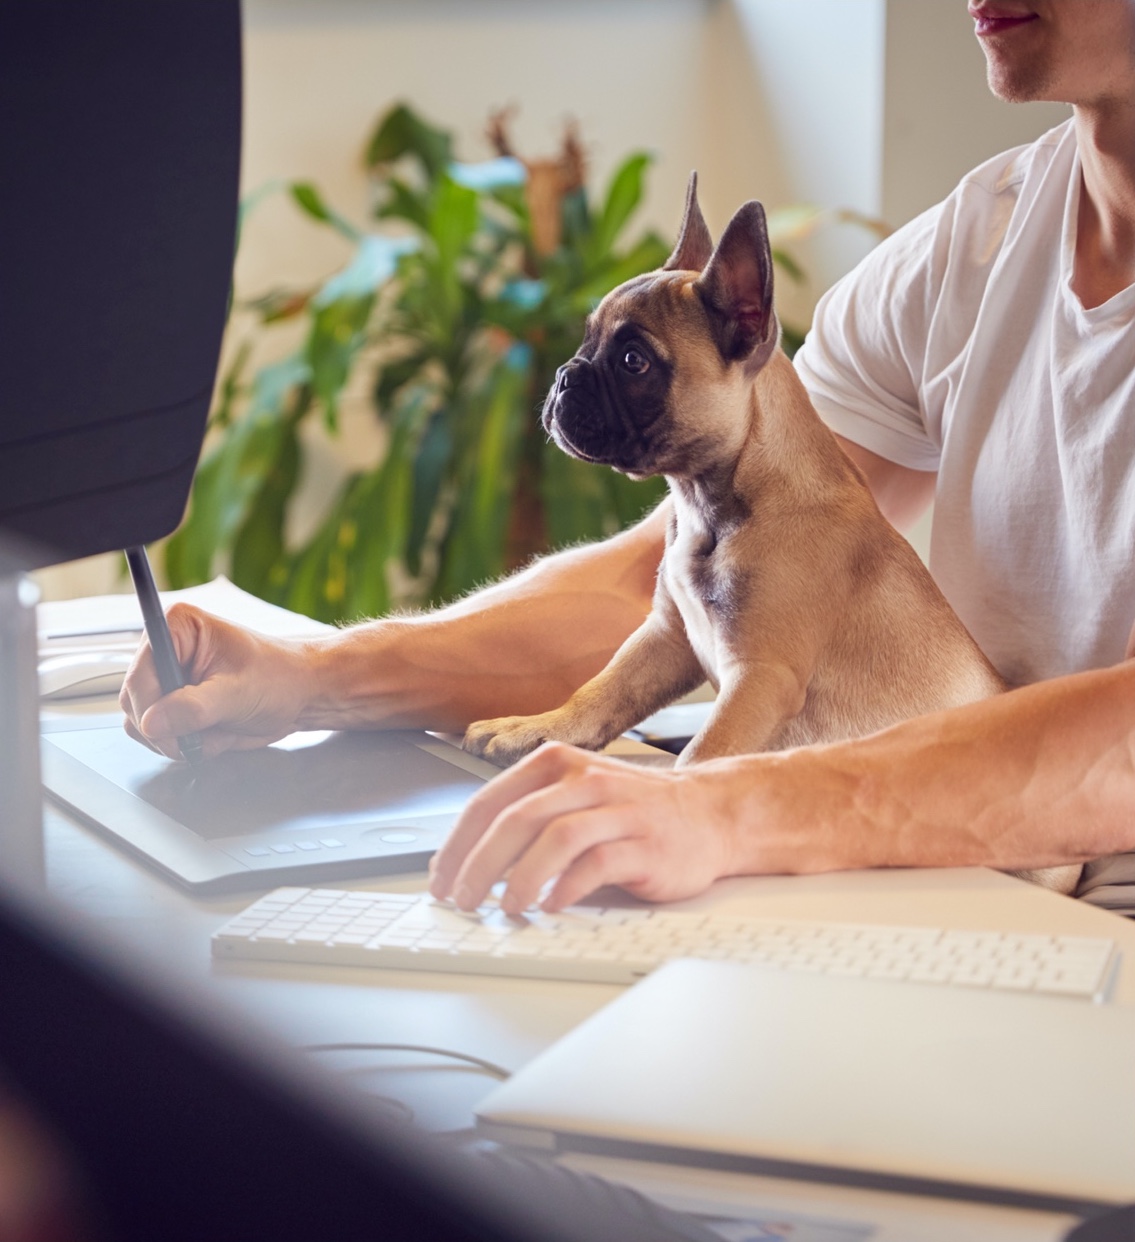 A puppy perks up as a woman works on her laptop with stylus